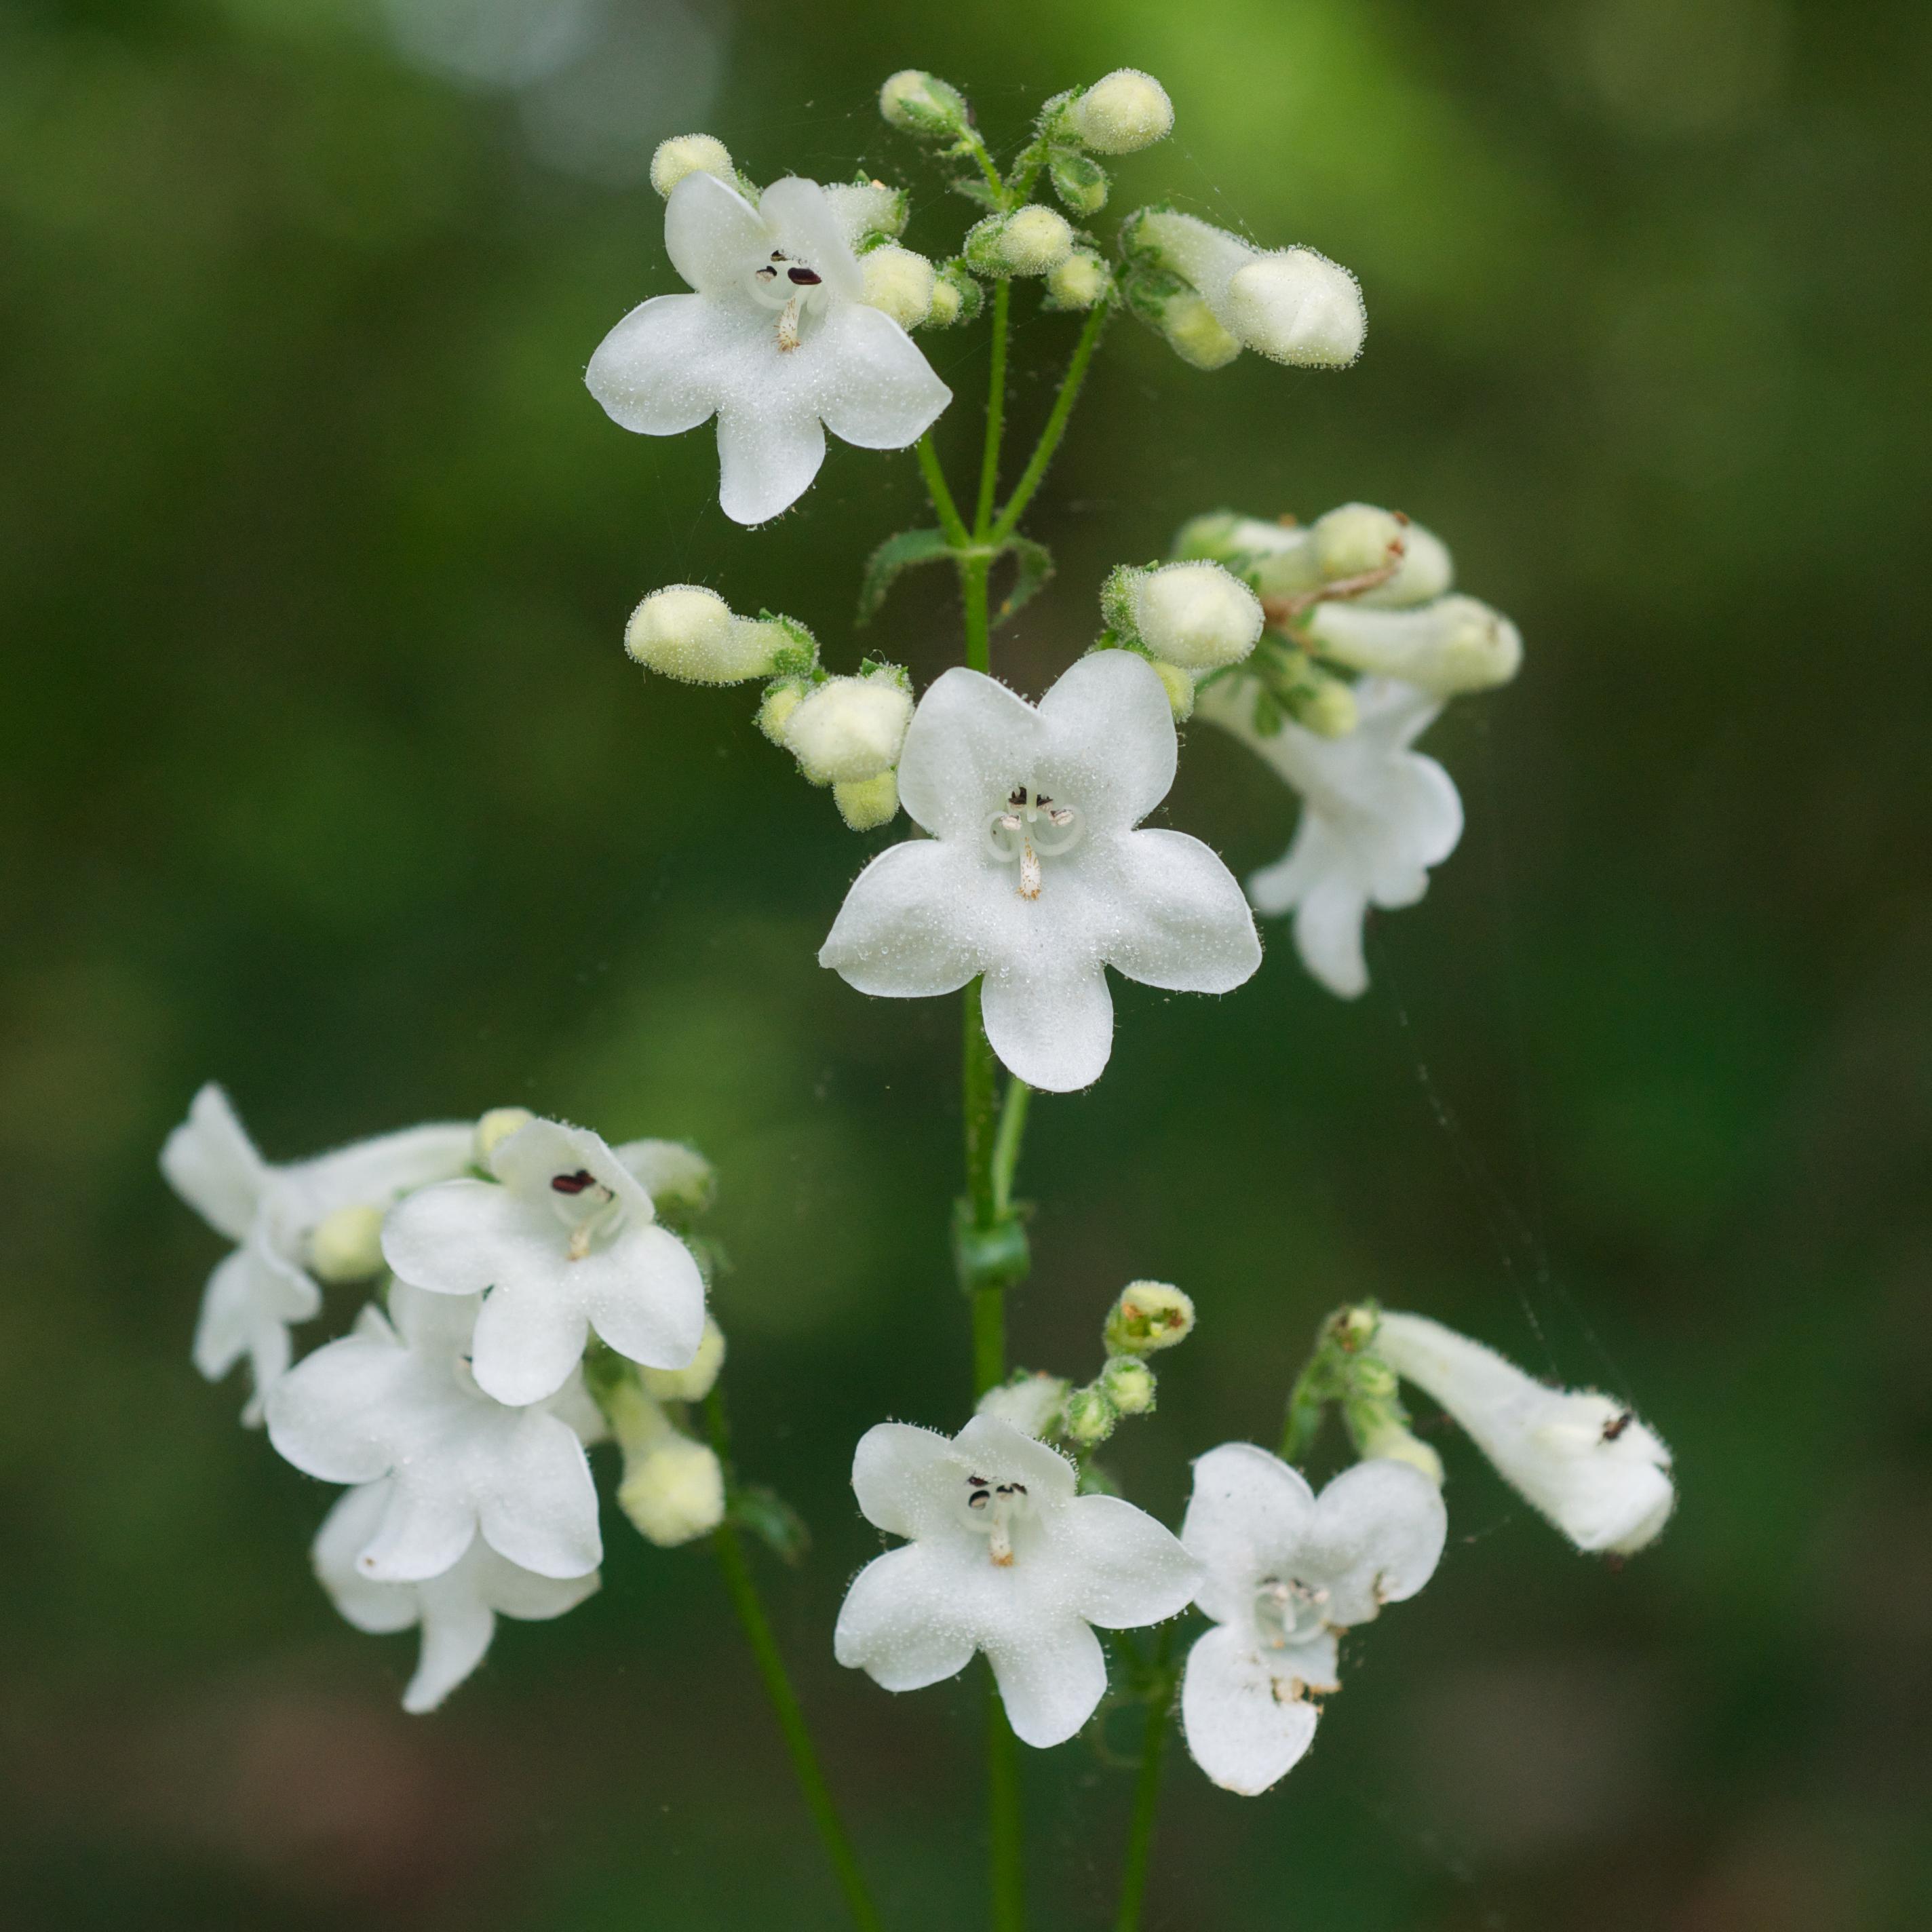 White flowers with beige-white stigma, black anthers, white hair and filaments, off-white buds, green sepals, stipules and stems